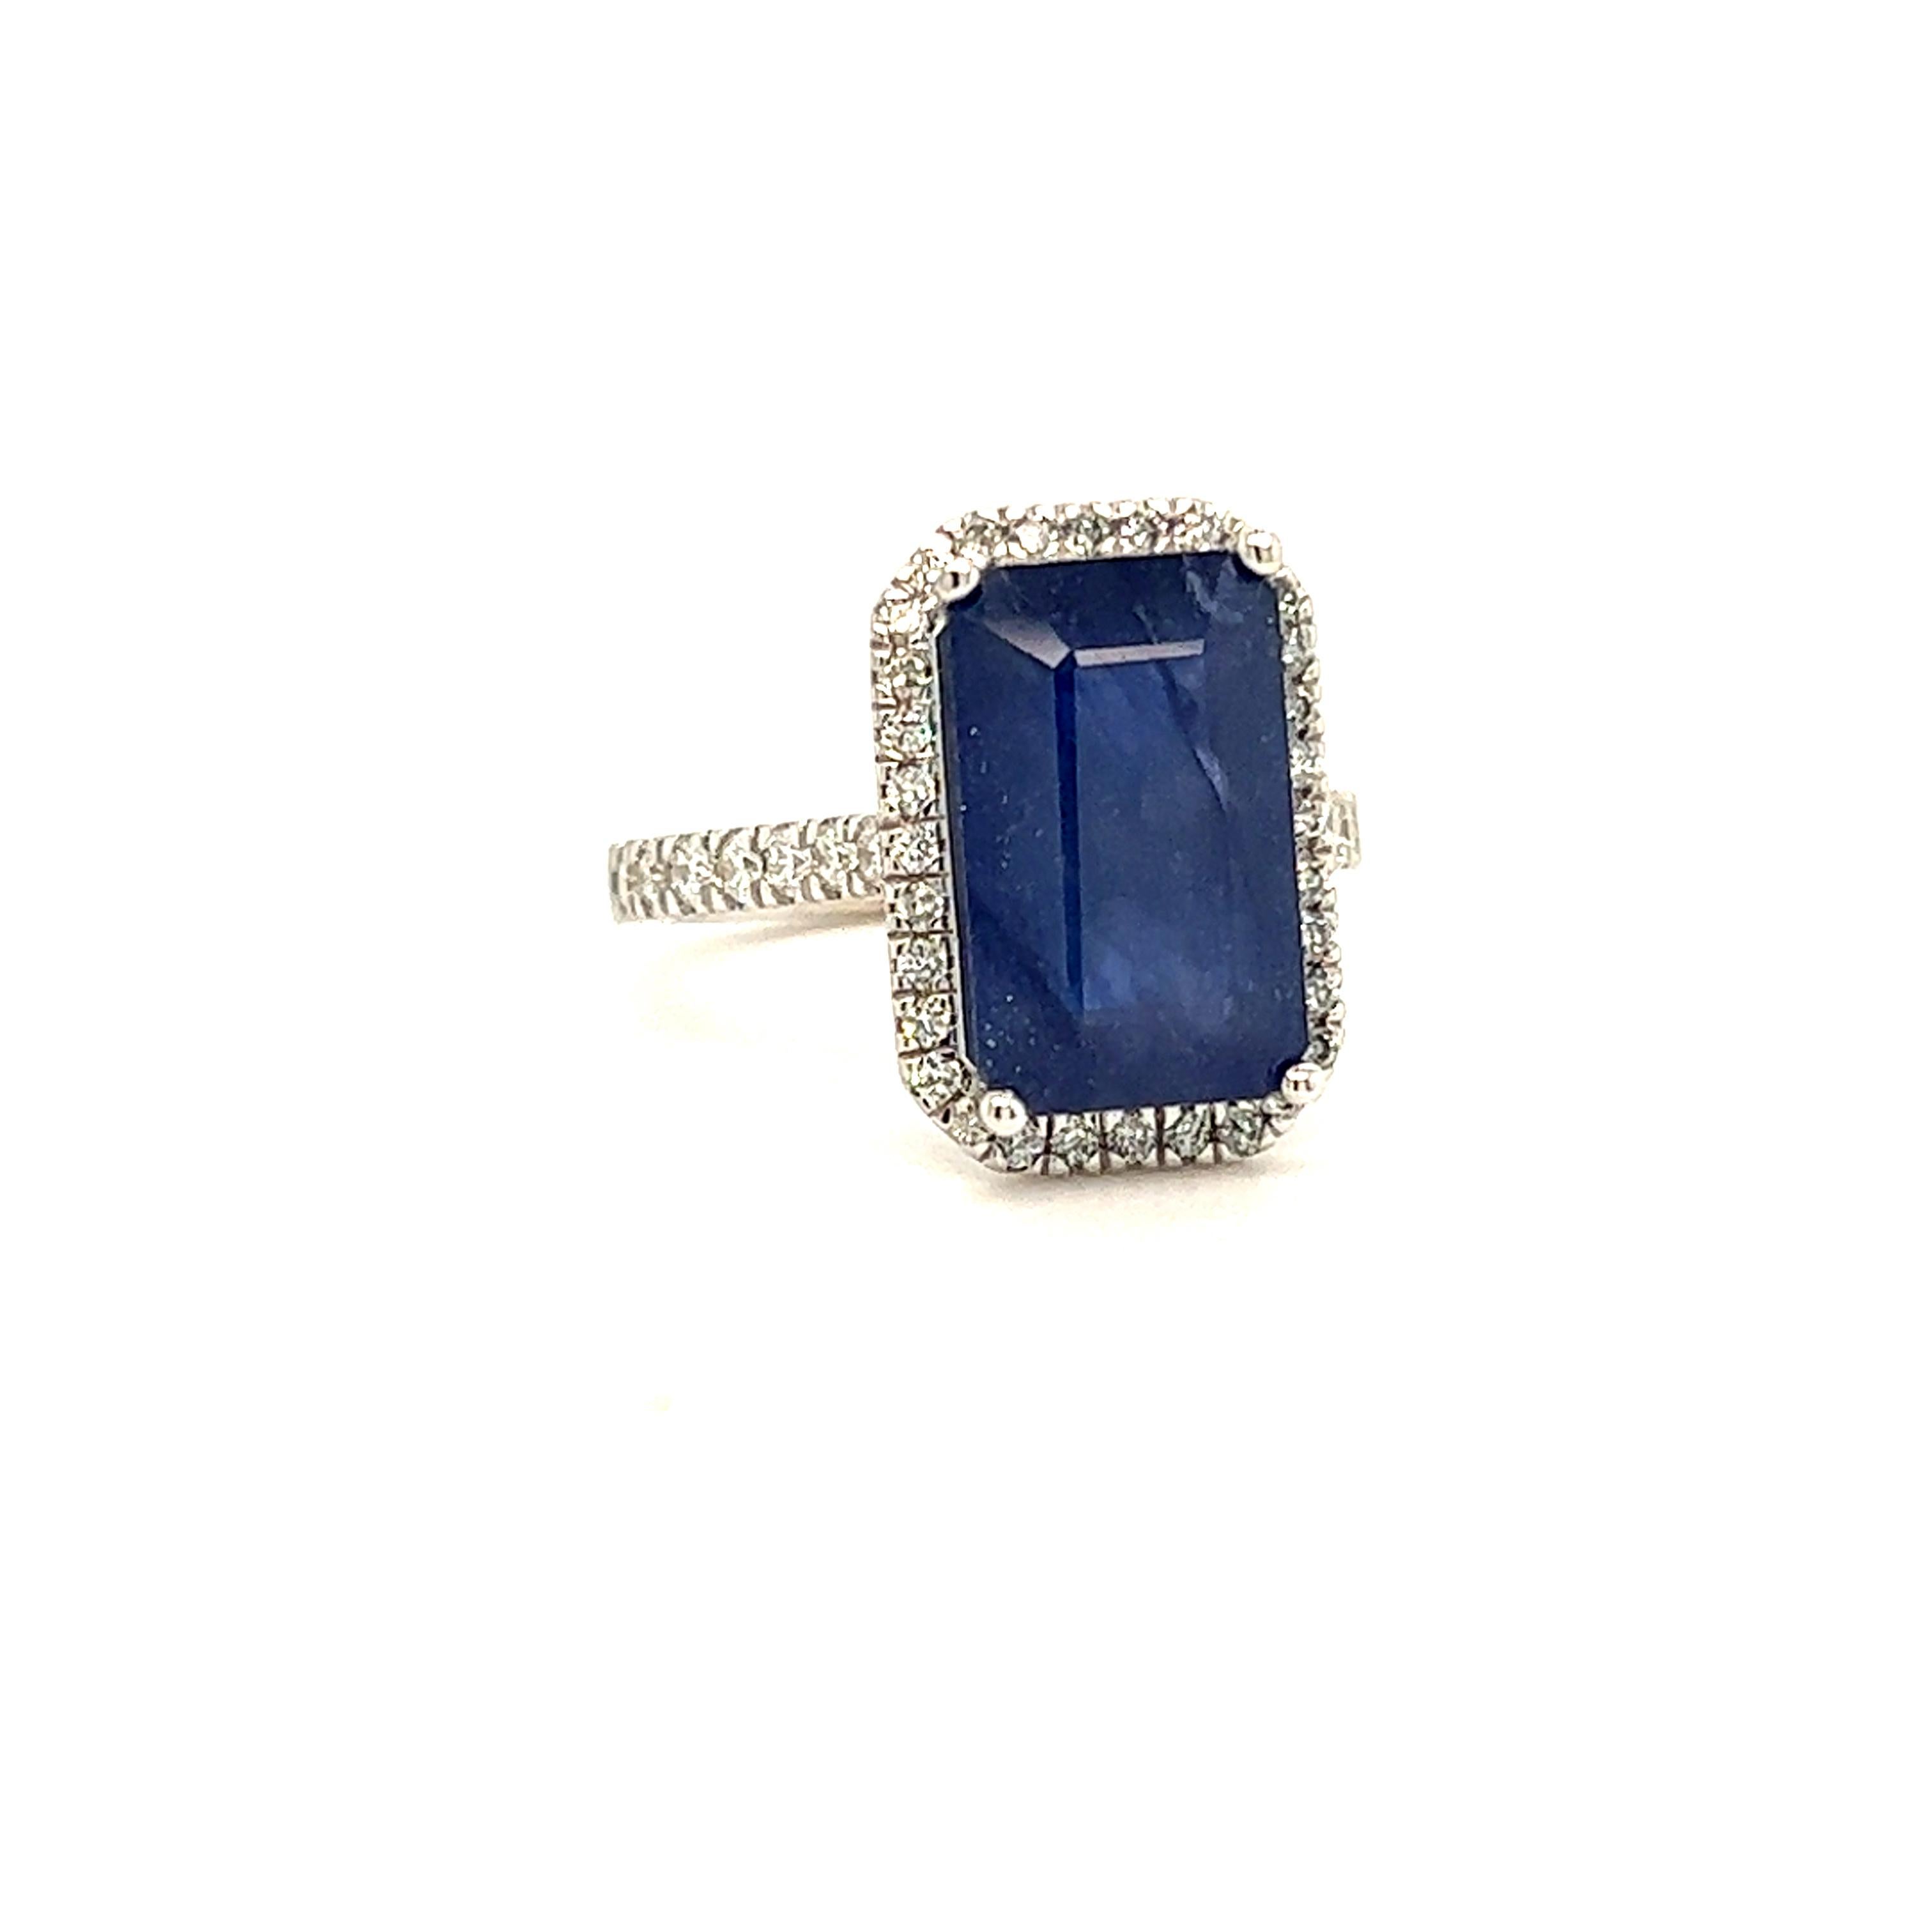 Sapphire Diamond Ring Size 6.25 14k Gold 6.84 TCW Certified For Sale 4